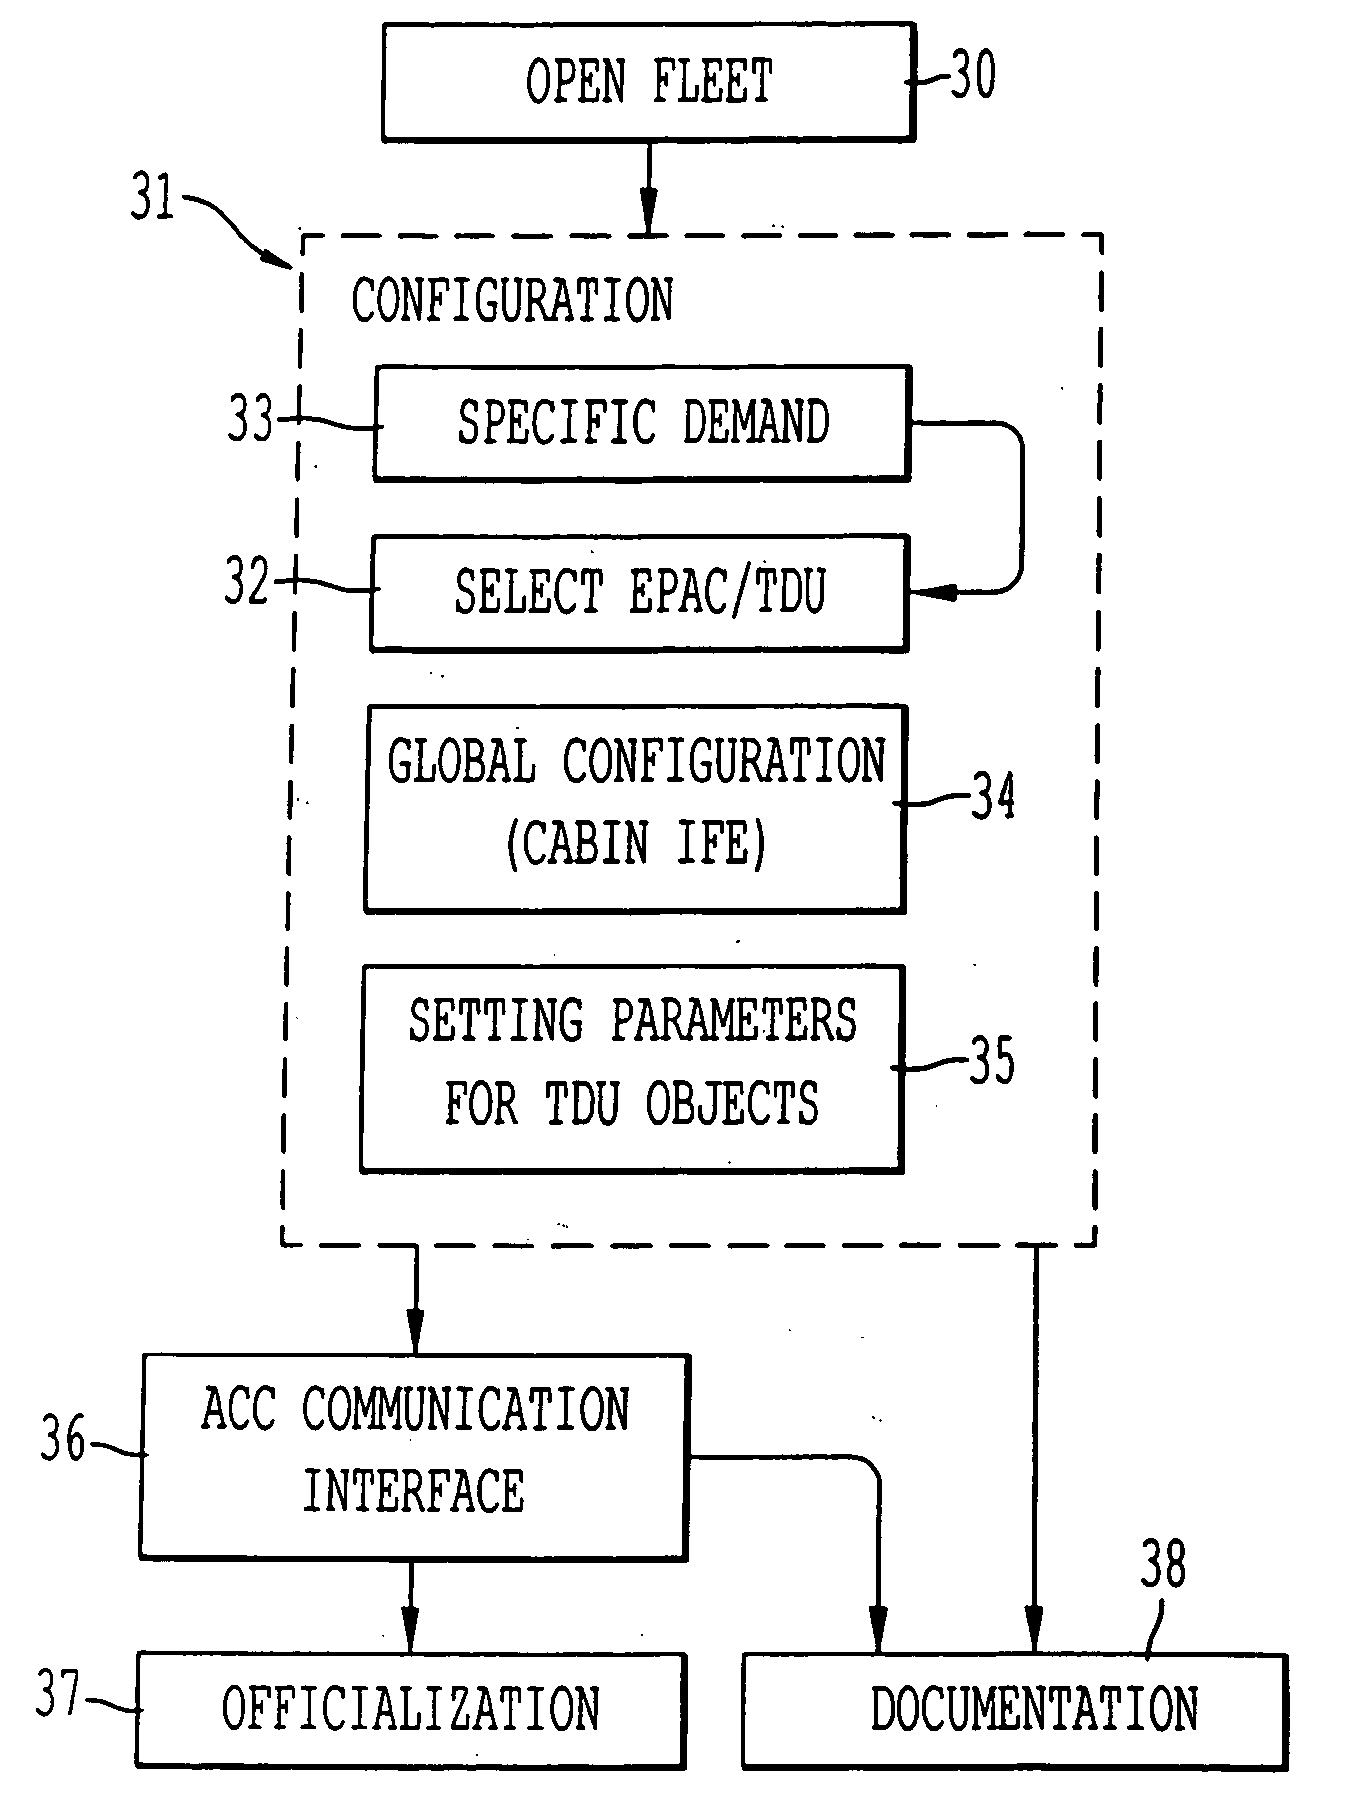 Process for structuring and managing the configuration of industrial products, and particularly aircraft